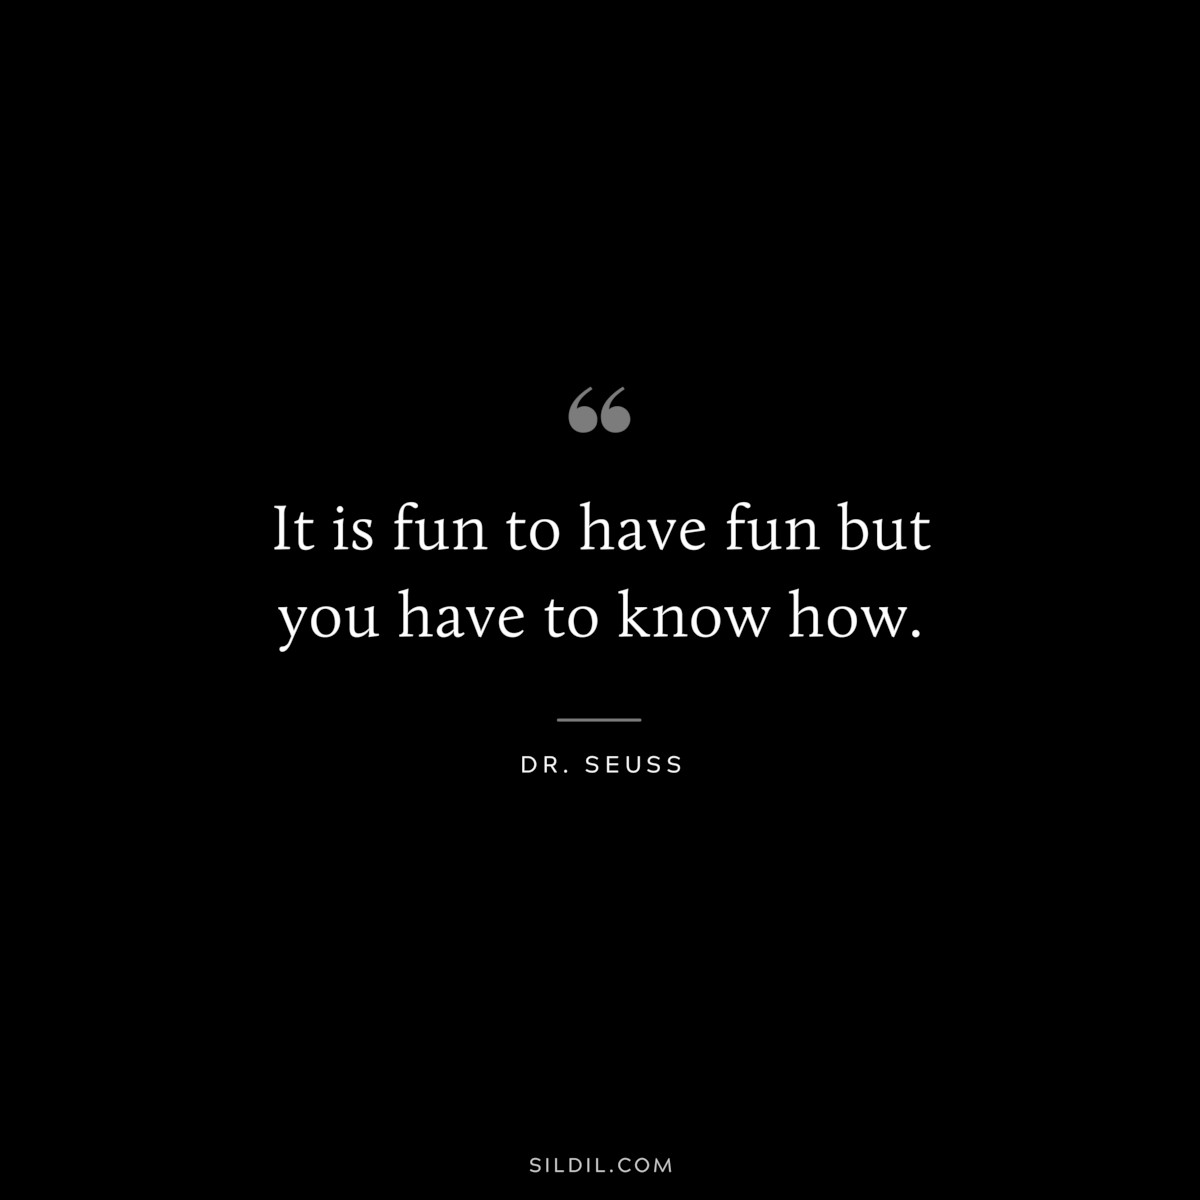 It is fun to have fun but you have to know how. ― Dr. Seuss